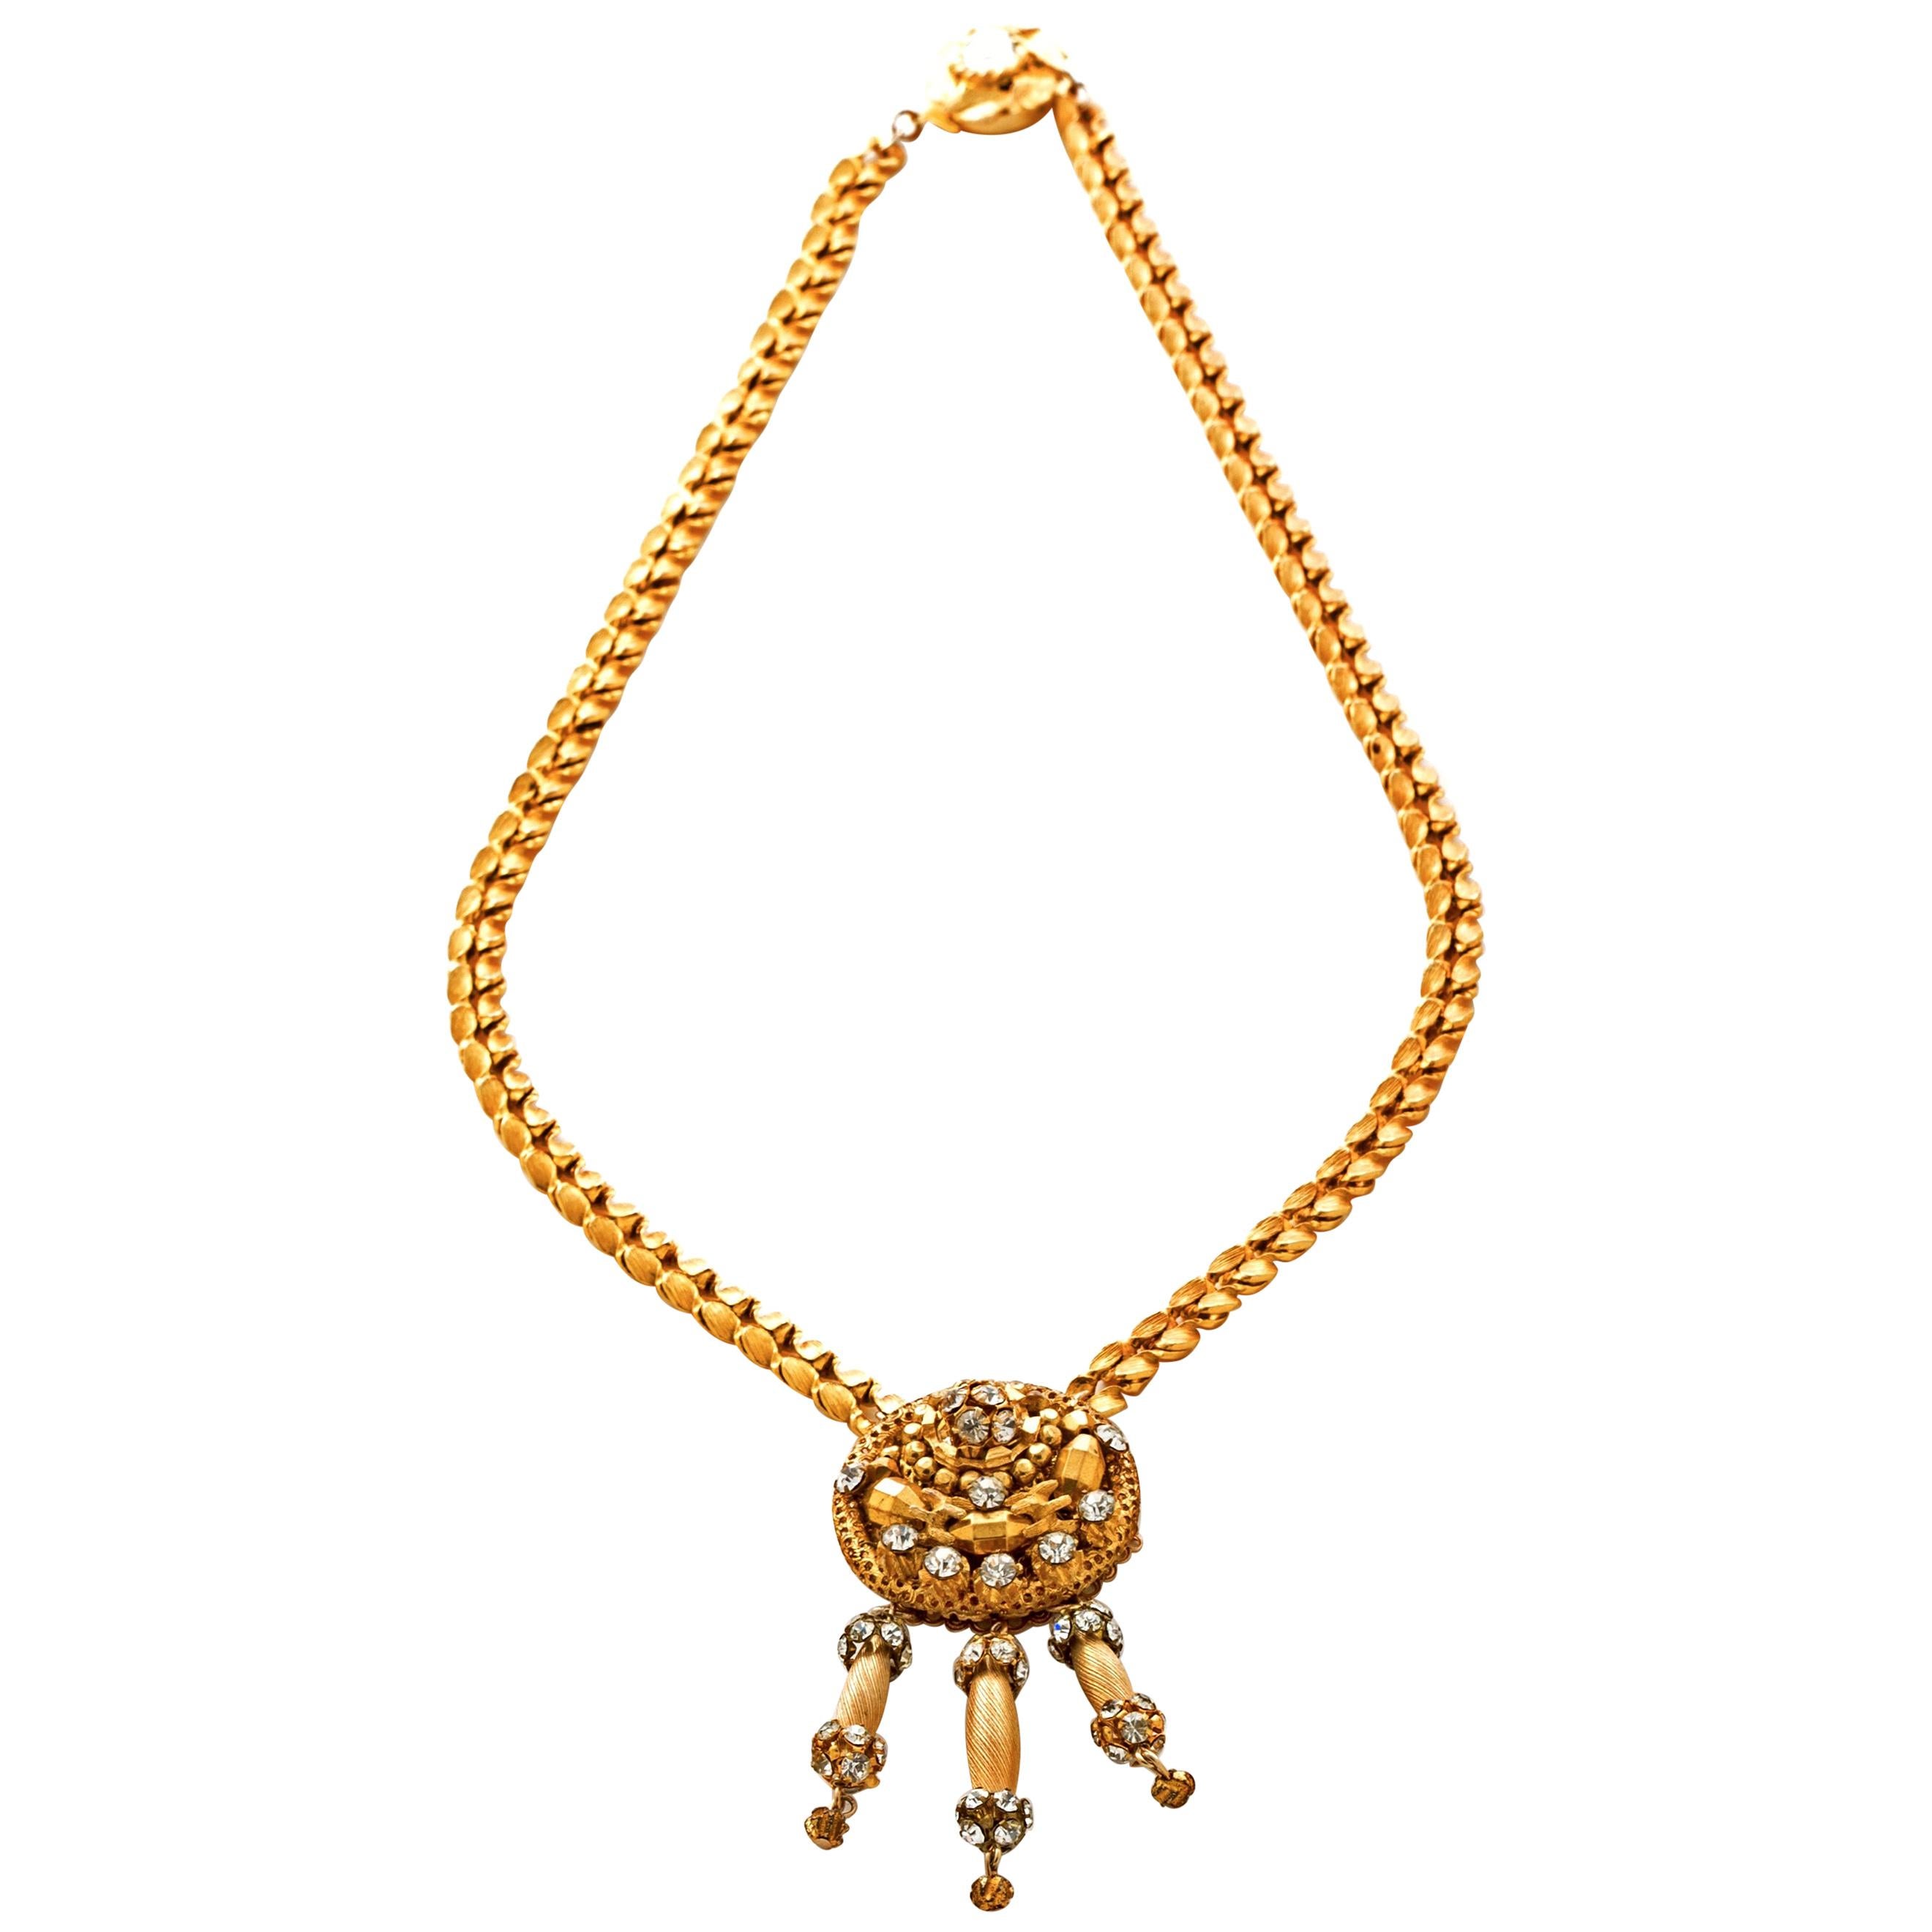 Hattie Carnegie Necklace & Earrings in Gilt Metal with Crystals For Sale